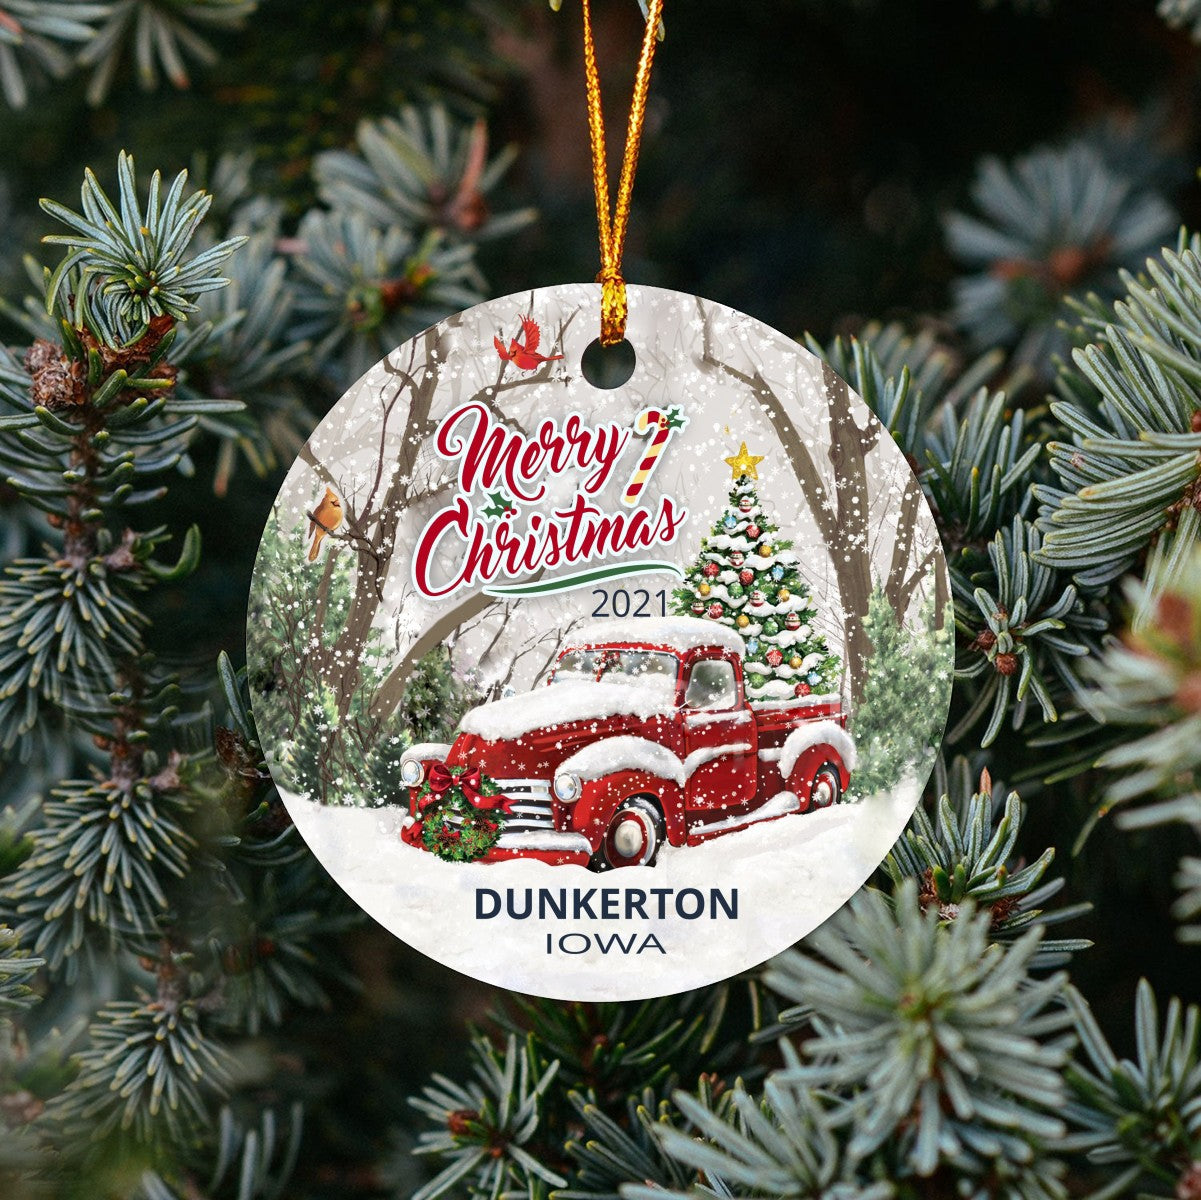 Christmas Tree Ornaments Dunkerton - Ornament With Name City, State Dunkerton Iowa IA Ornament - Red Truck Xmas Ornaments 3'' Plastic Gift For Family, Friend And Housewarming